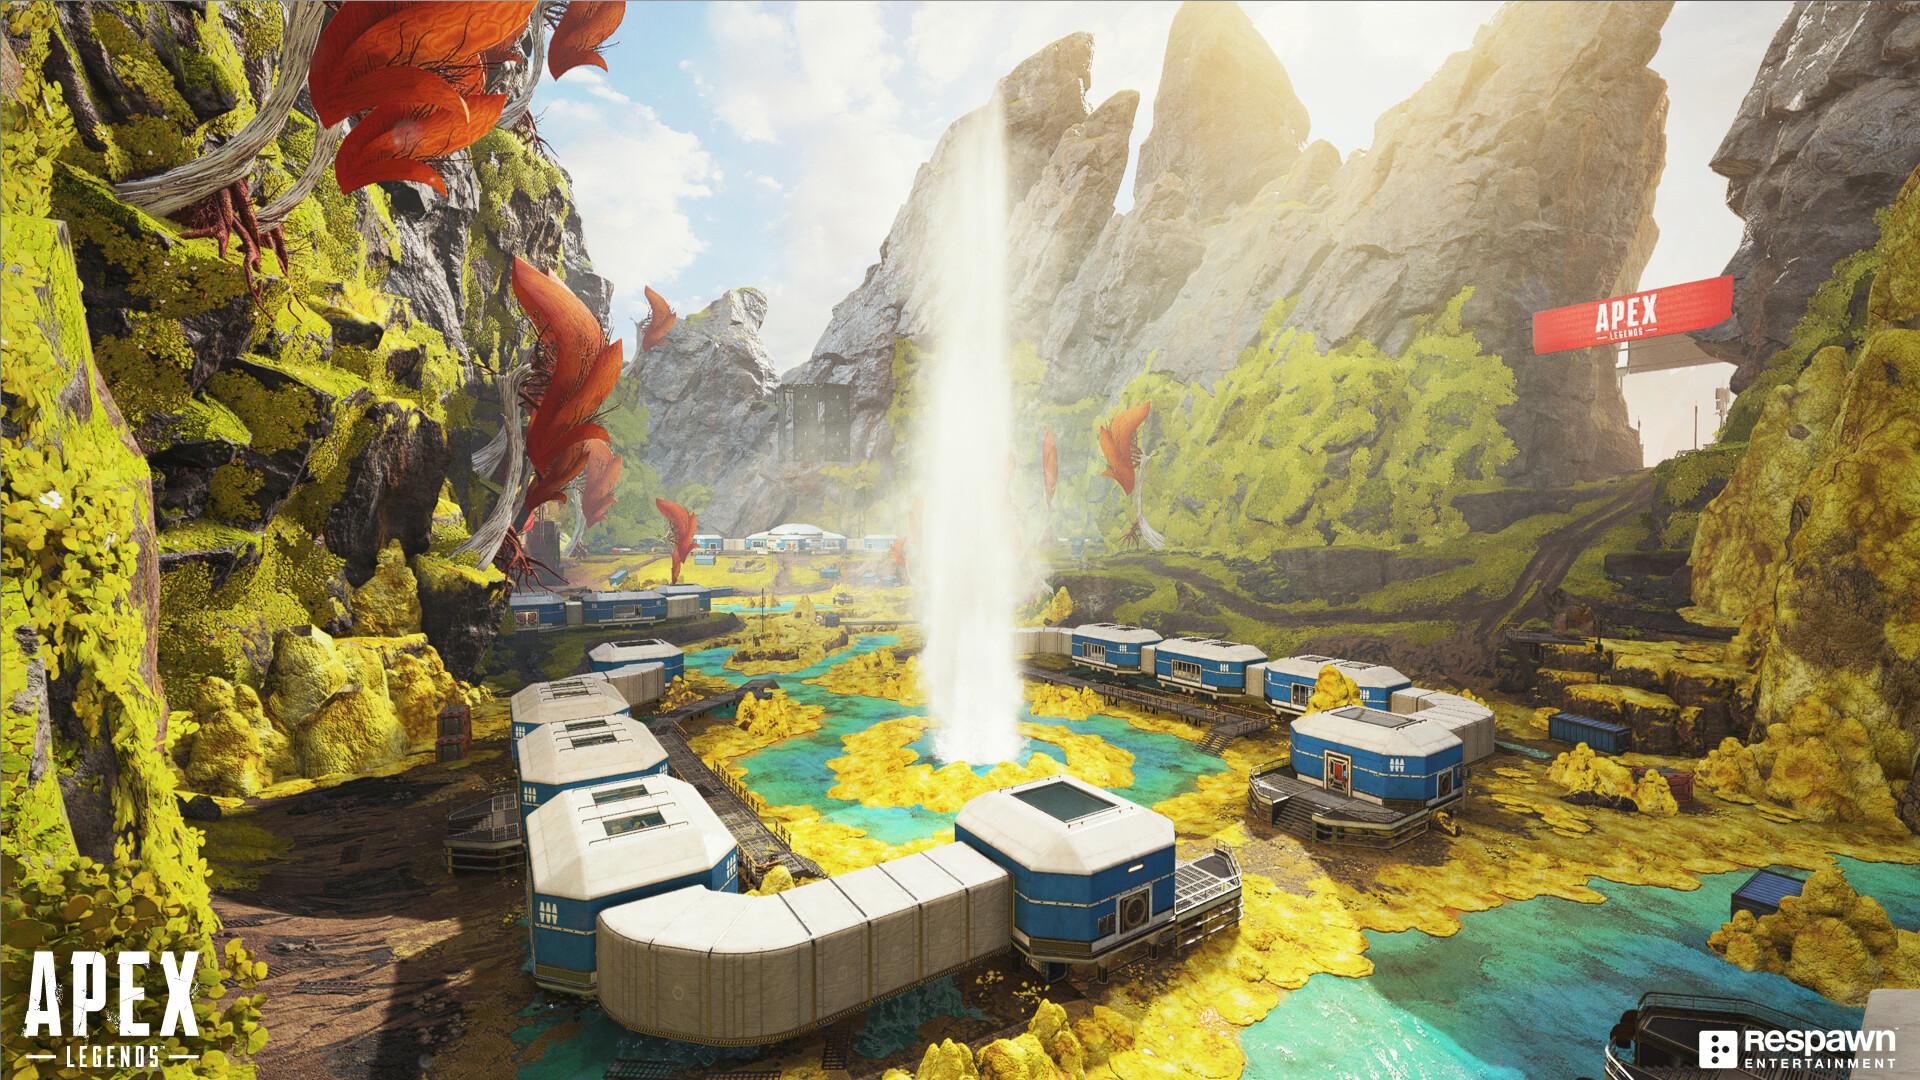 The Geyser is hidden from much of the rest of the World's Edge map, making it a great loot zone